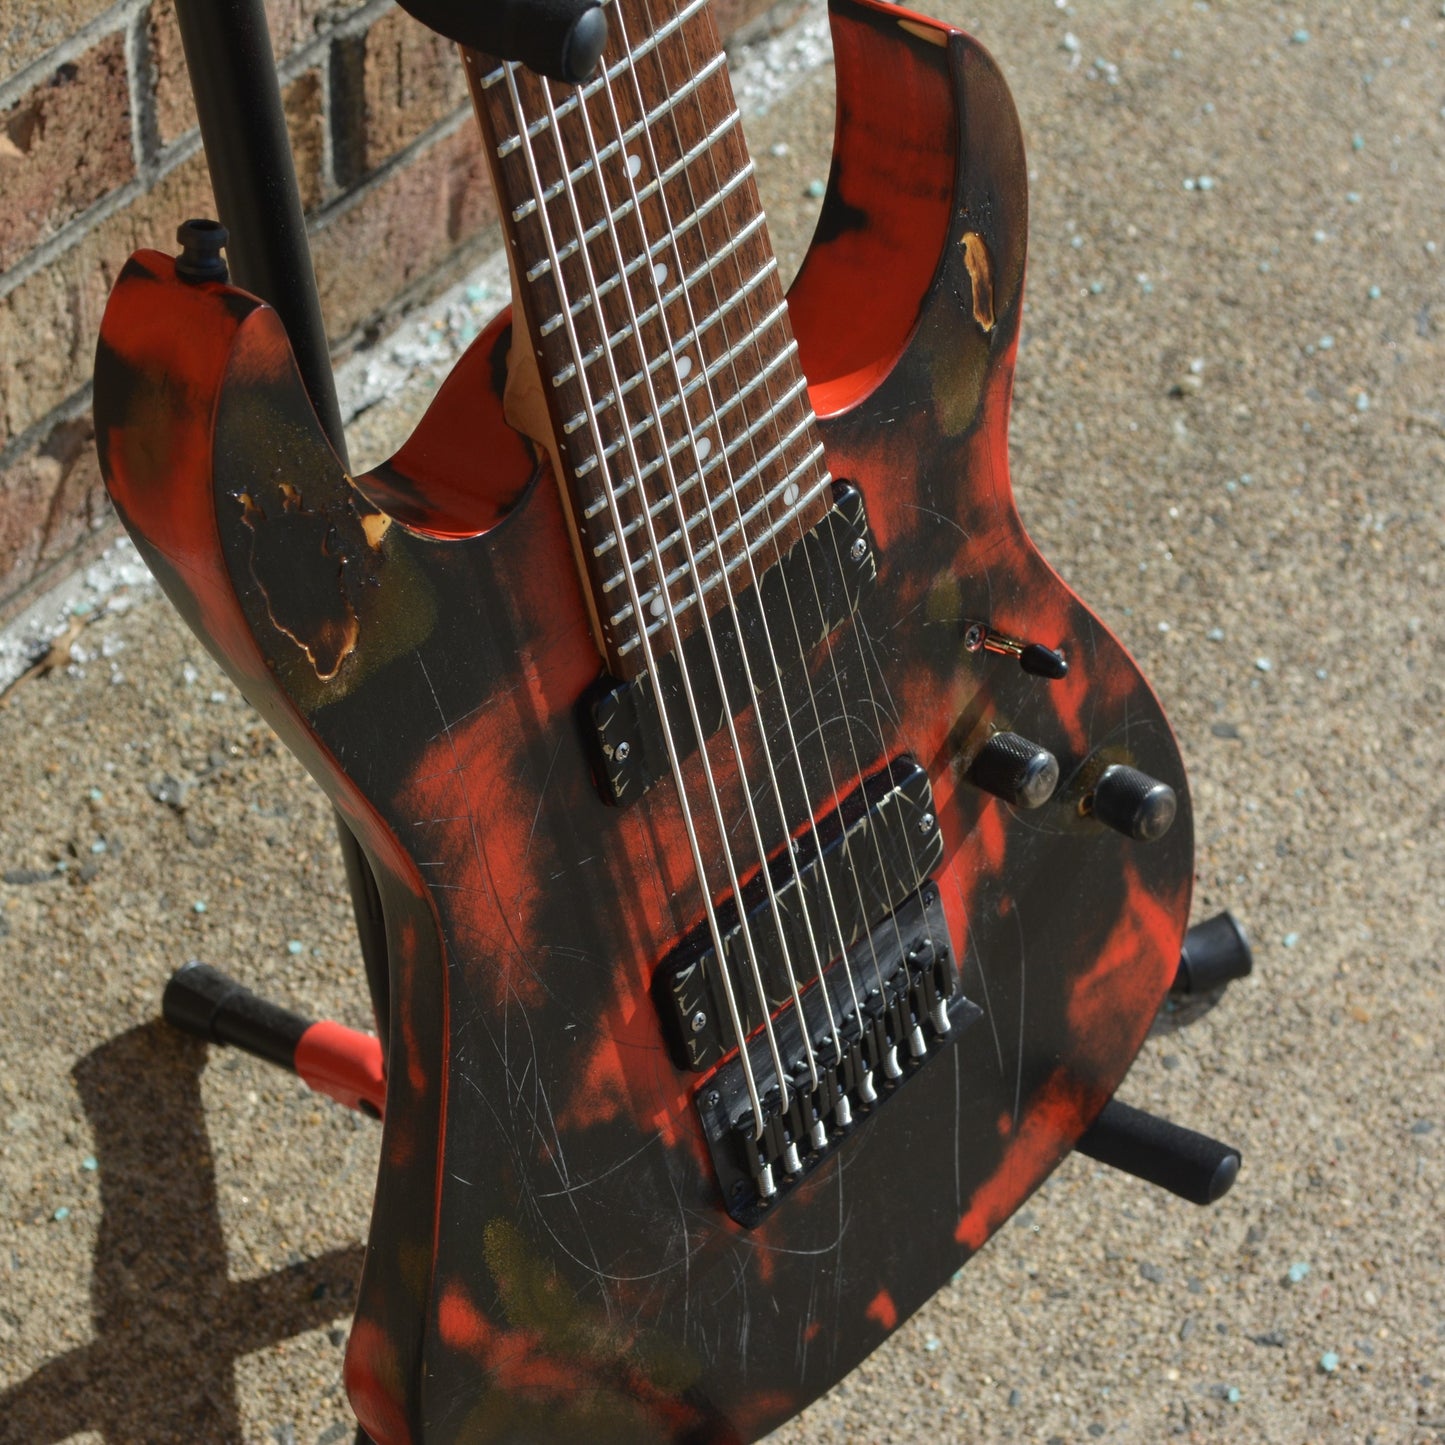 Ibanez Custom R8 w/ Bare Knuckle Cold Sweats Distressed Black and Red Satin